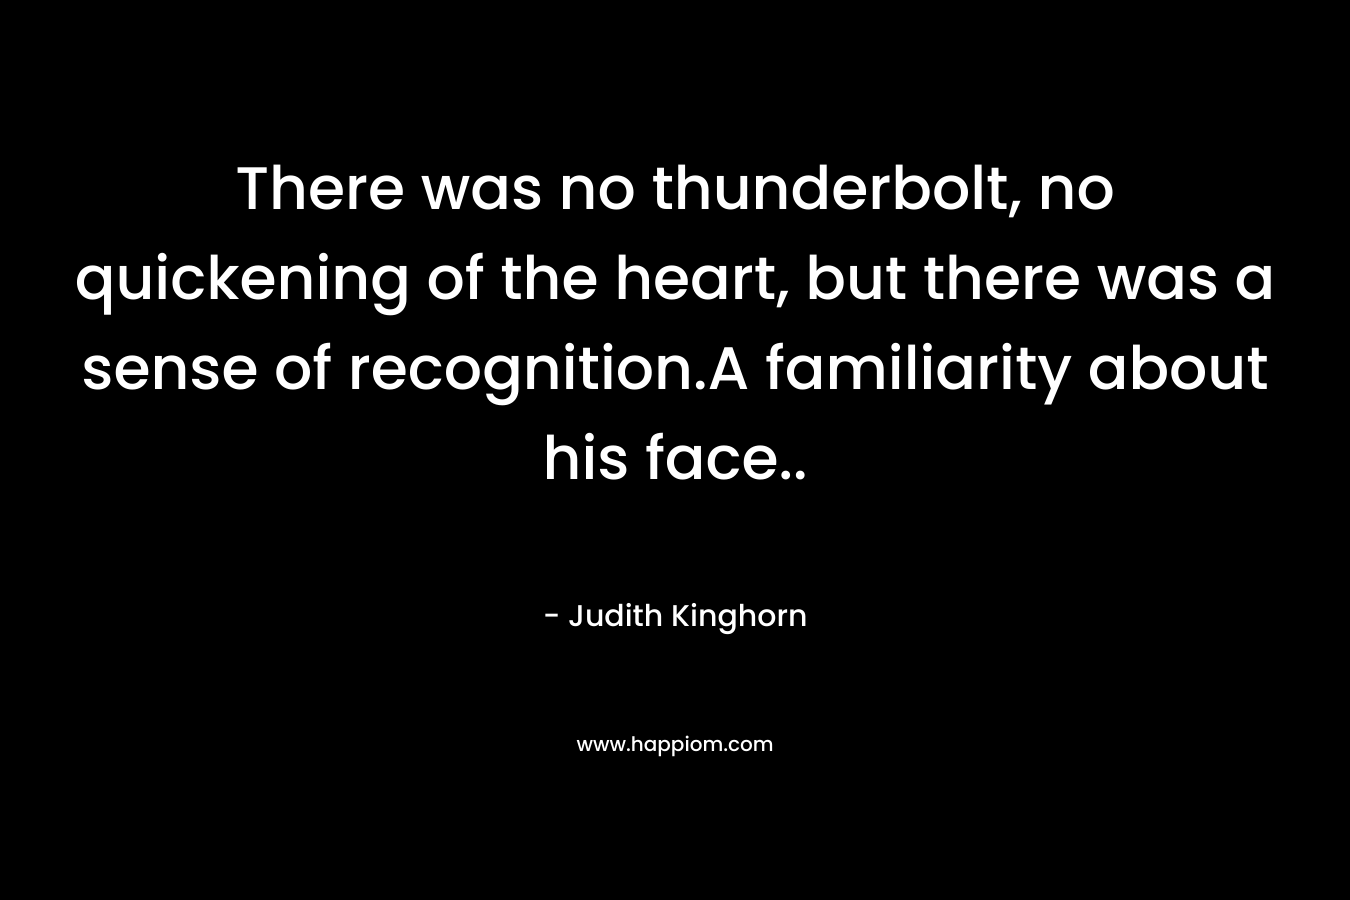 There was no thunderbolt, no quickening of the heart, but there was a sense of recognition.A familiarity about his face.. – Judith Kinghorn